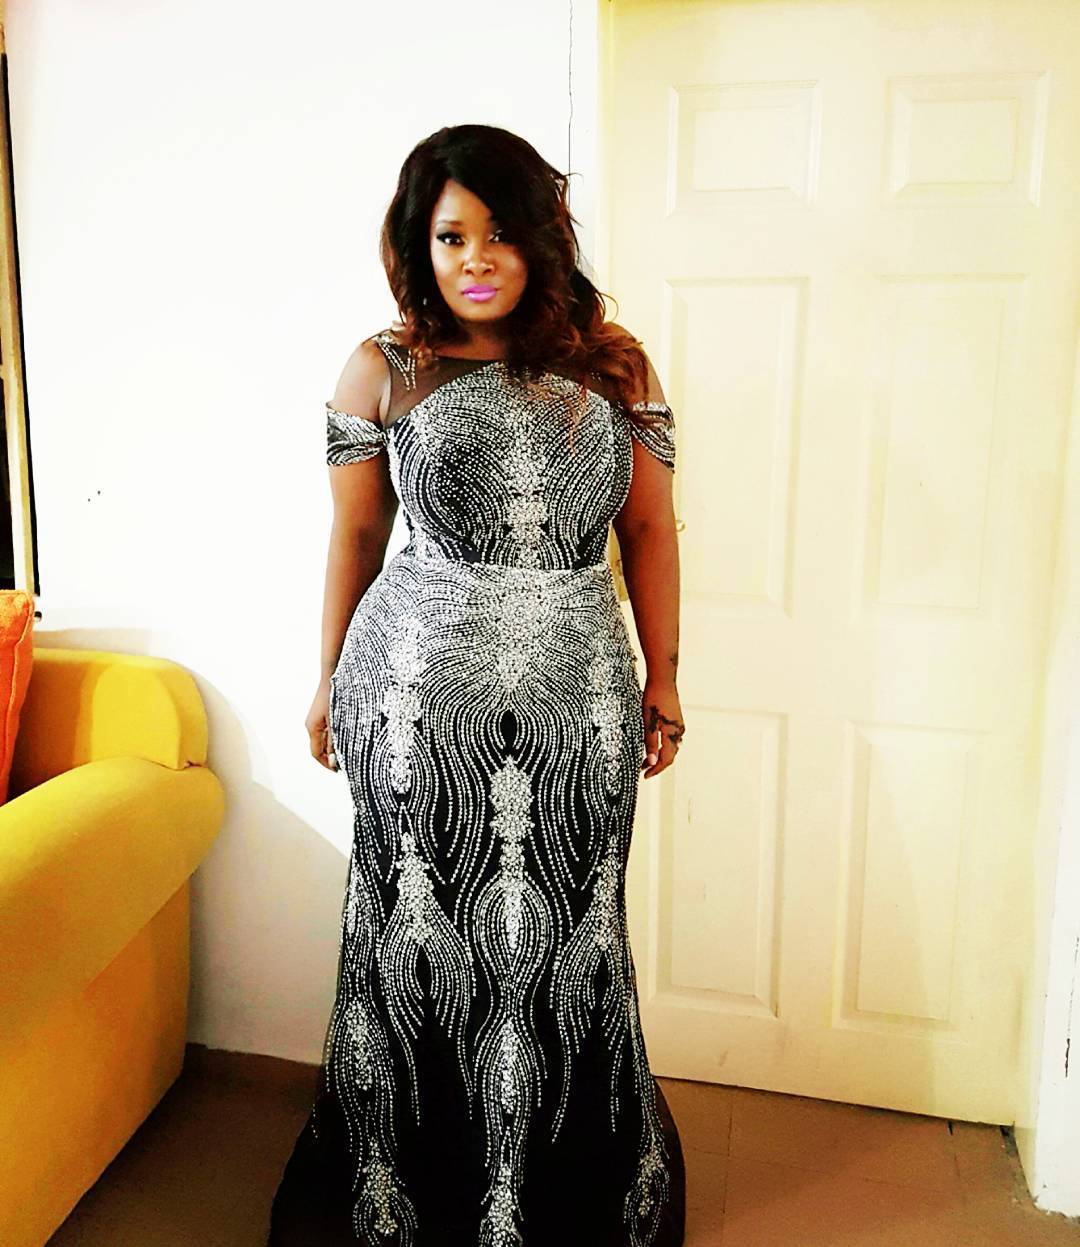 toolz-epic-response-to-fan-who-saw-baby-bump-on-her ig - gidibase